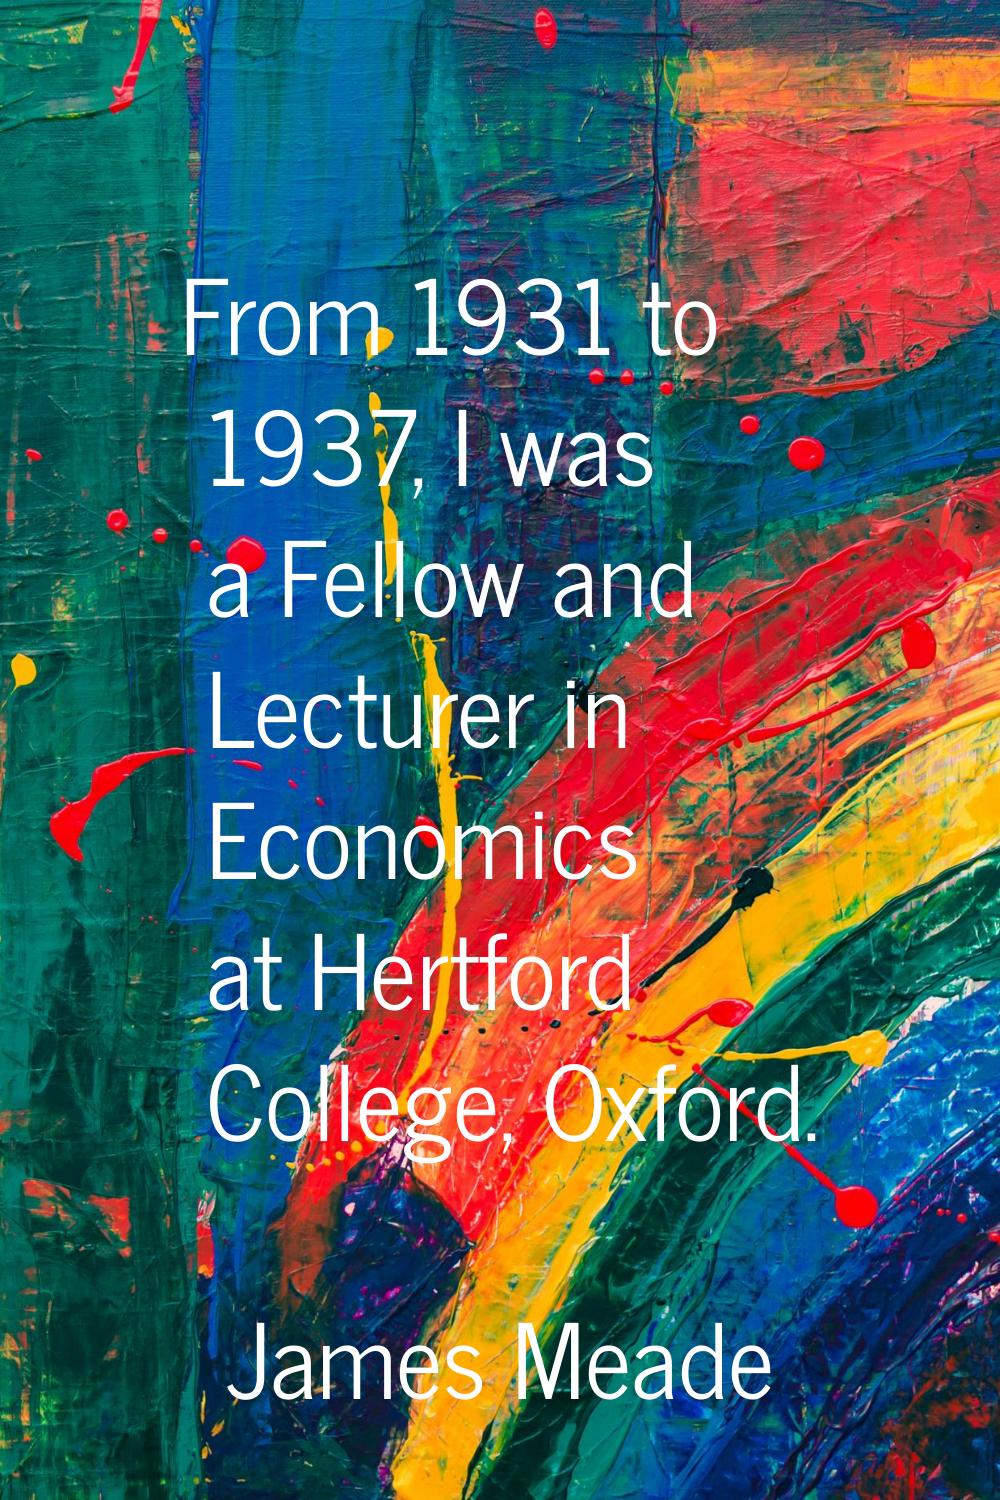 From 1931 to 1937, I was a Fellow and Lecturer in Economics at Hertford College, Oxford.